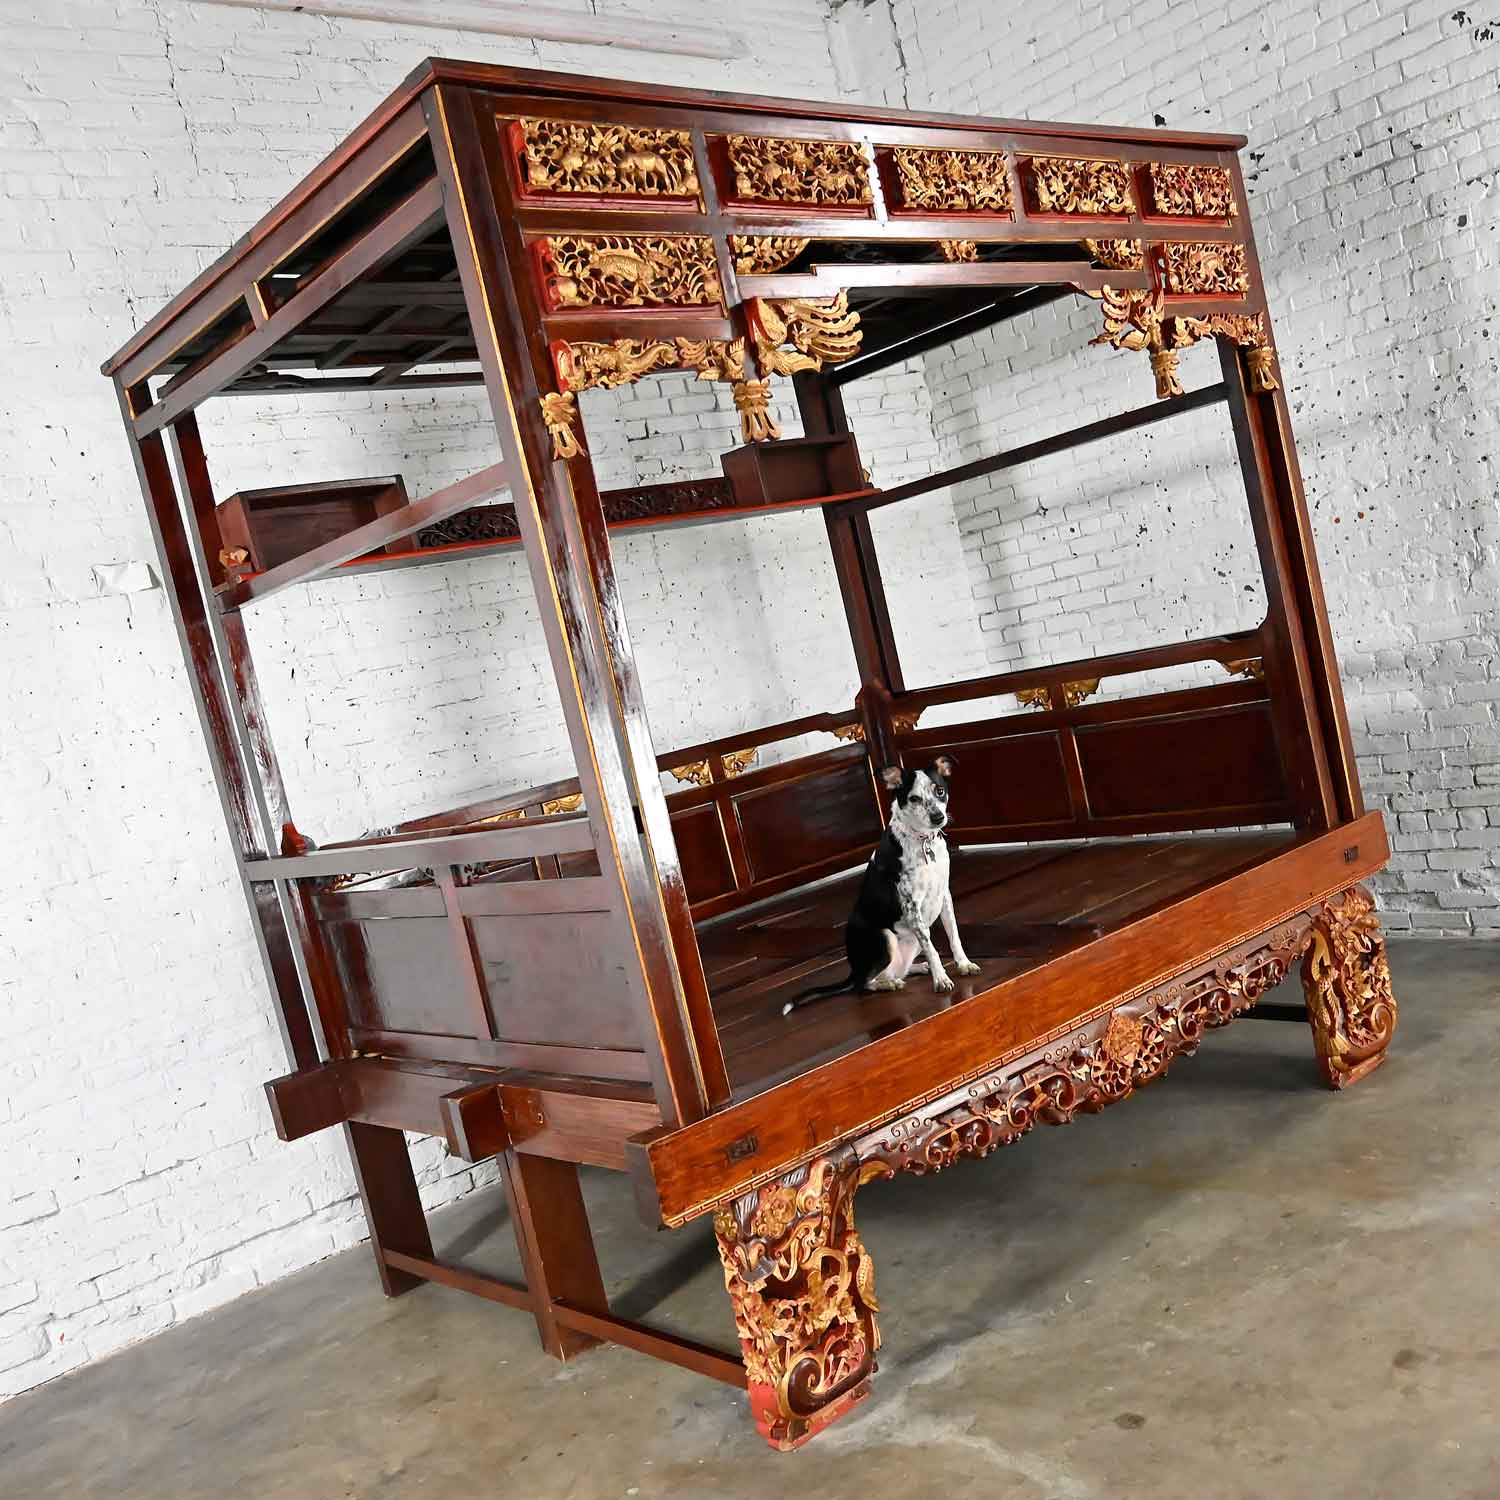 Vintage Chinoiserie Chinese Elm Wedding Opium Canopy Bed Hand Carved Asian Designs Queen Size